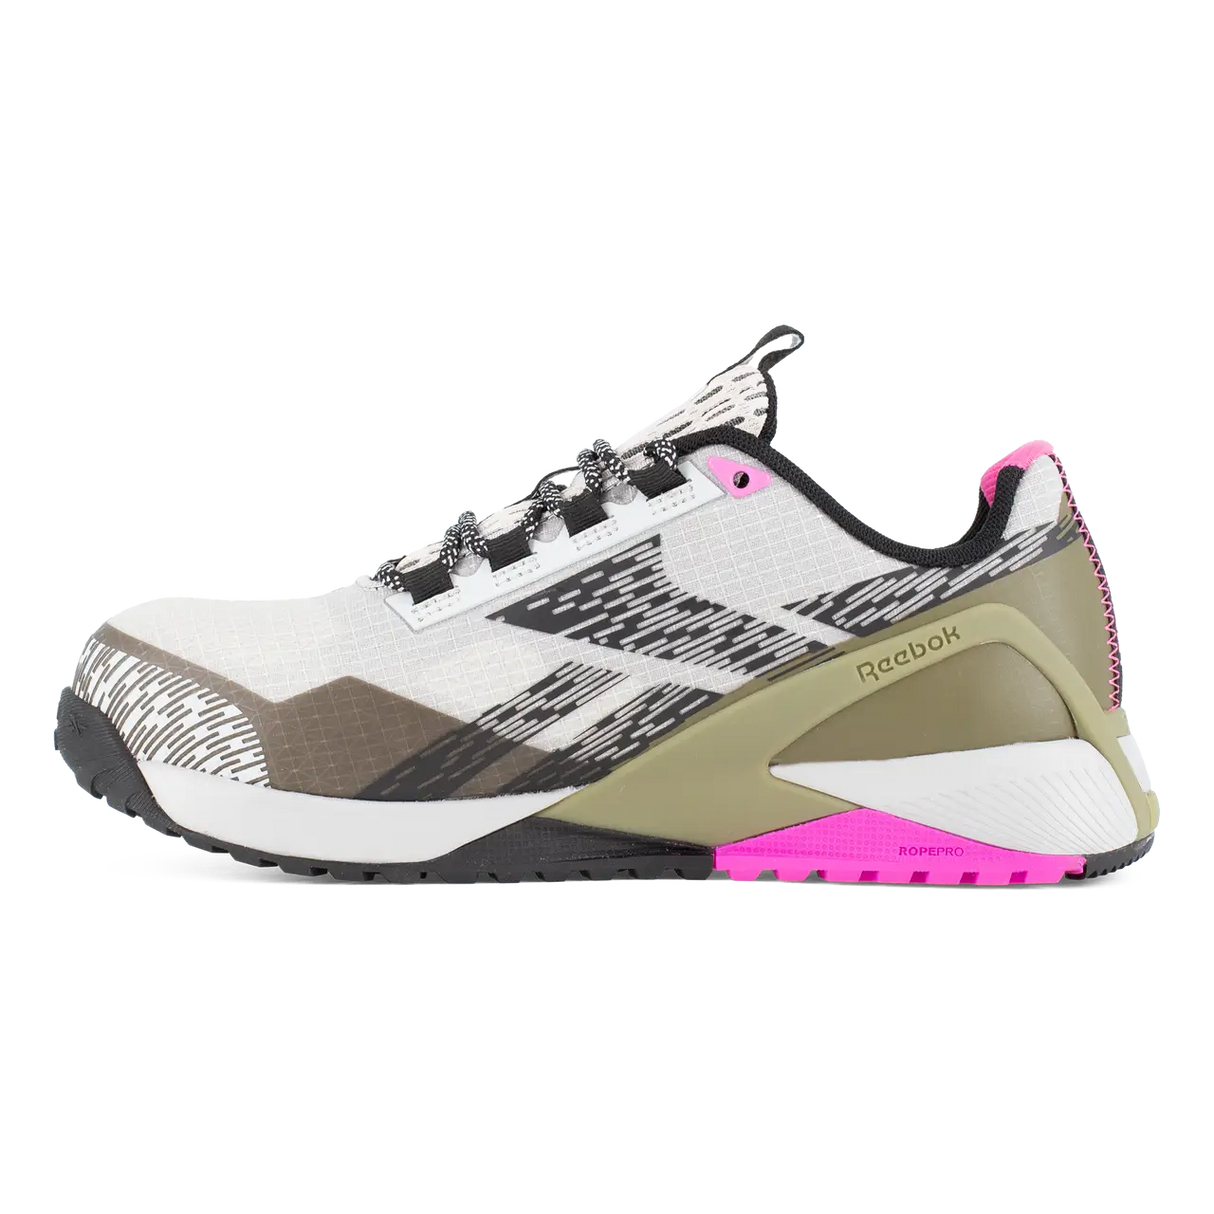 Reebok Work-Women's Nano X1 Adventure Work Athletic Composite Toe Silver, Army Green, and Pink-Steel Toes-2